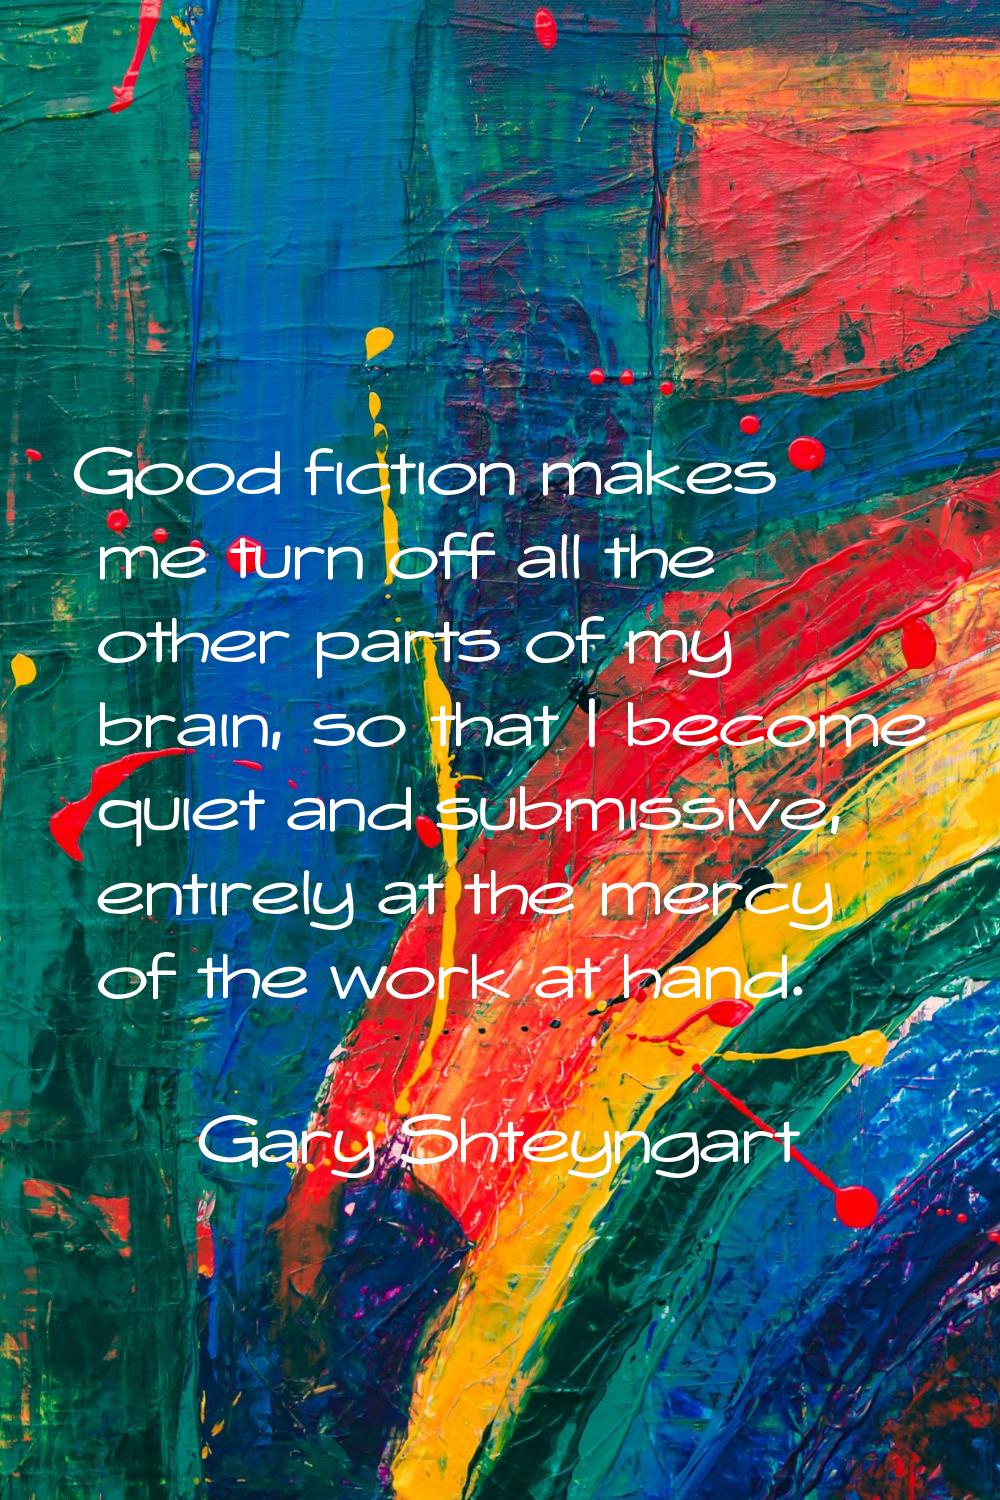 Good fiction makes me turn off all the other parts of my brain, so that I become quiet and submissi